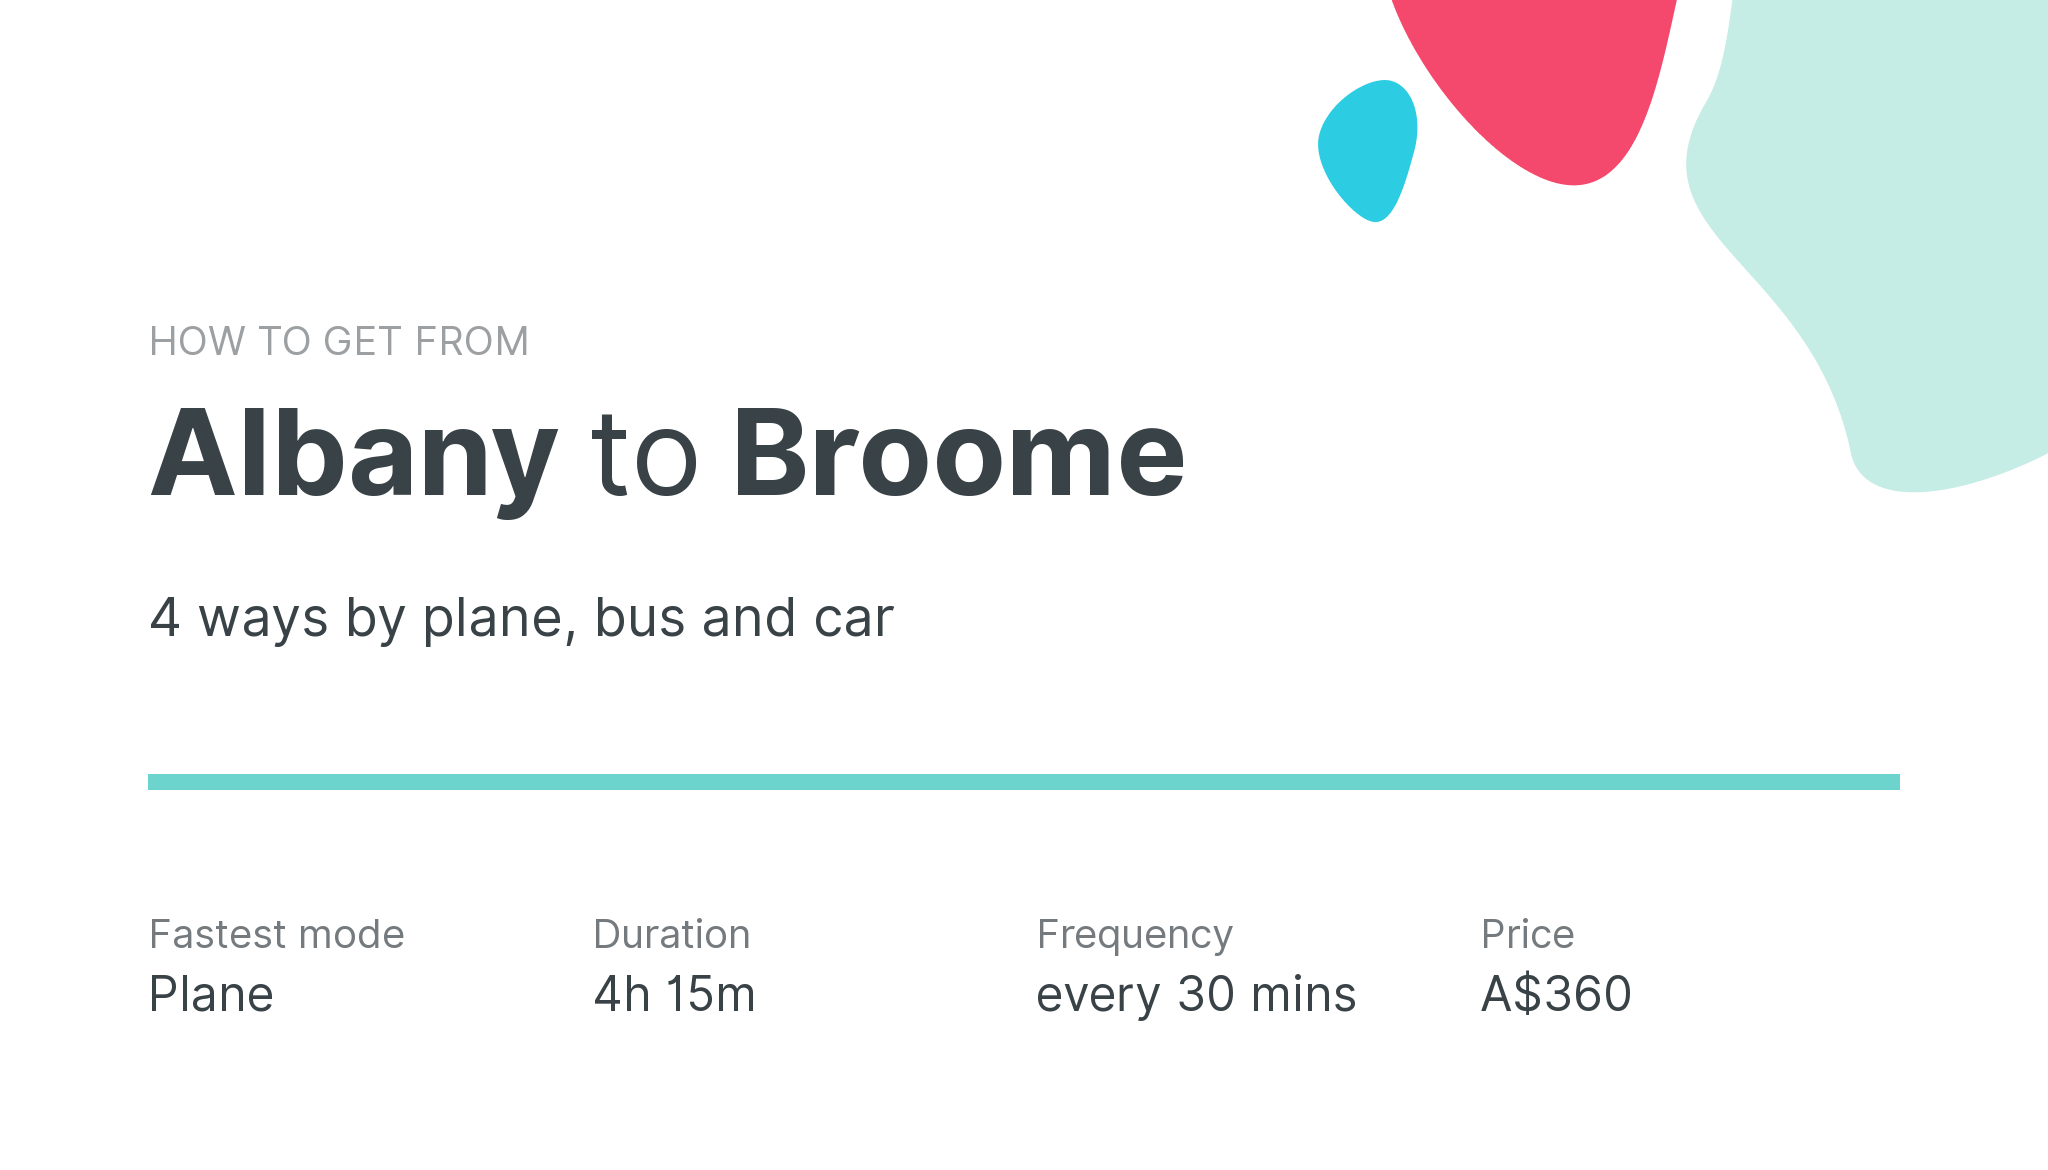 How do I get from Albany to Broome